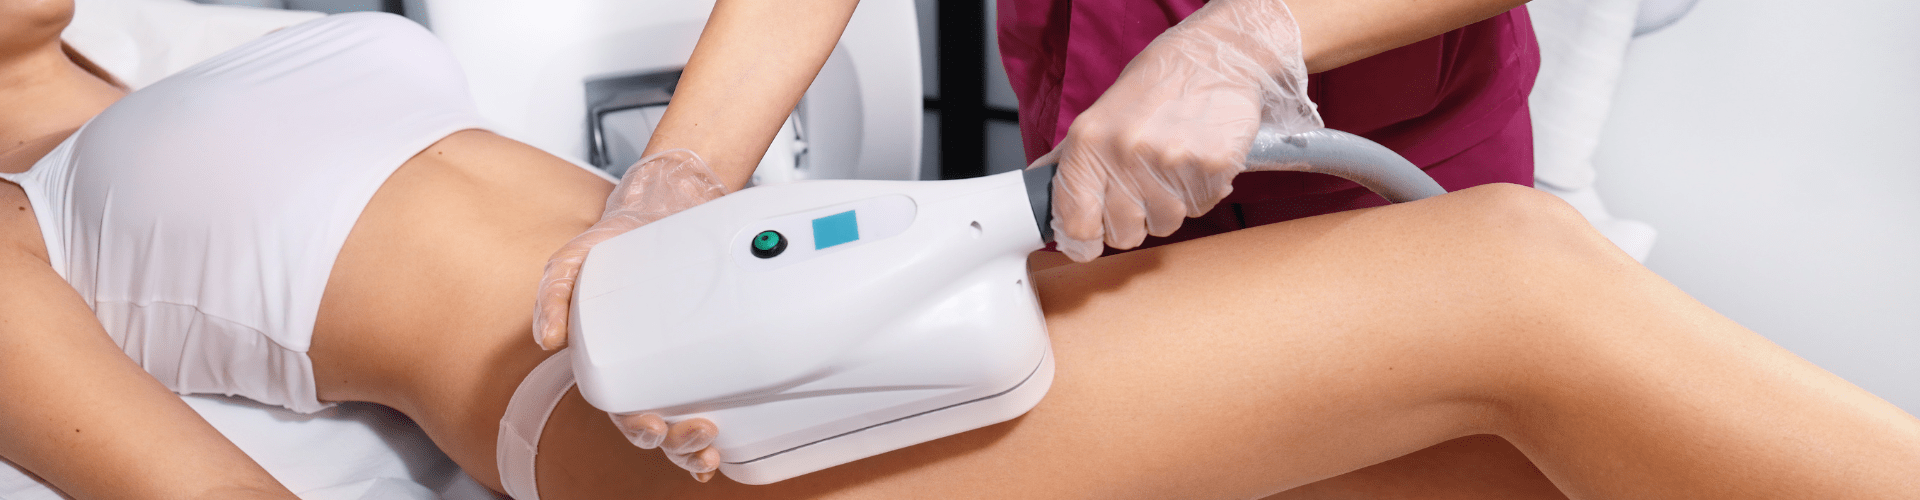 A professional in a clinical setting using a large handheld laser device to perform a cosmetic procedure on a client's thigh.